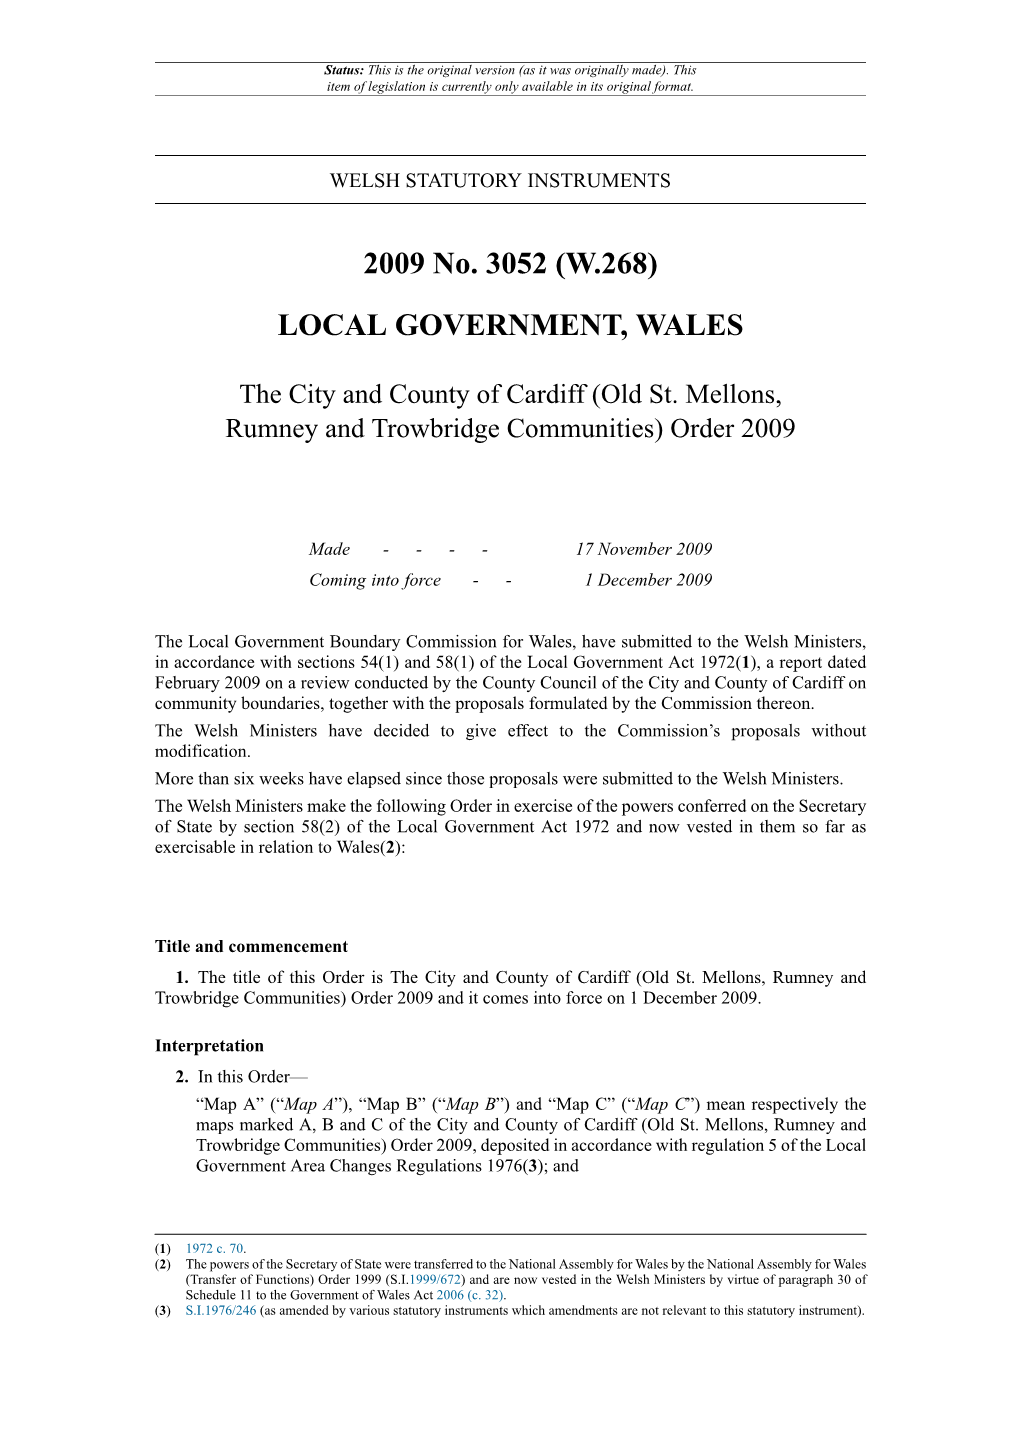 The City and County of Cardiff (Old St. Mellons, Rumney and Trowbridge Communities) Order 2009